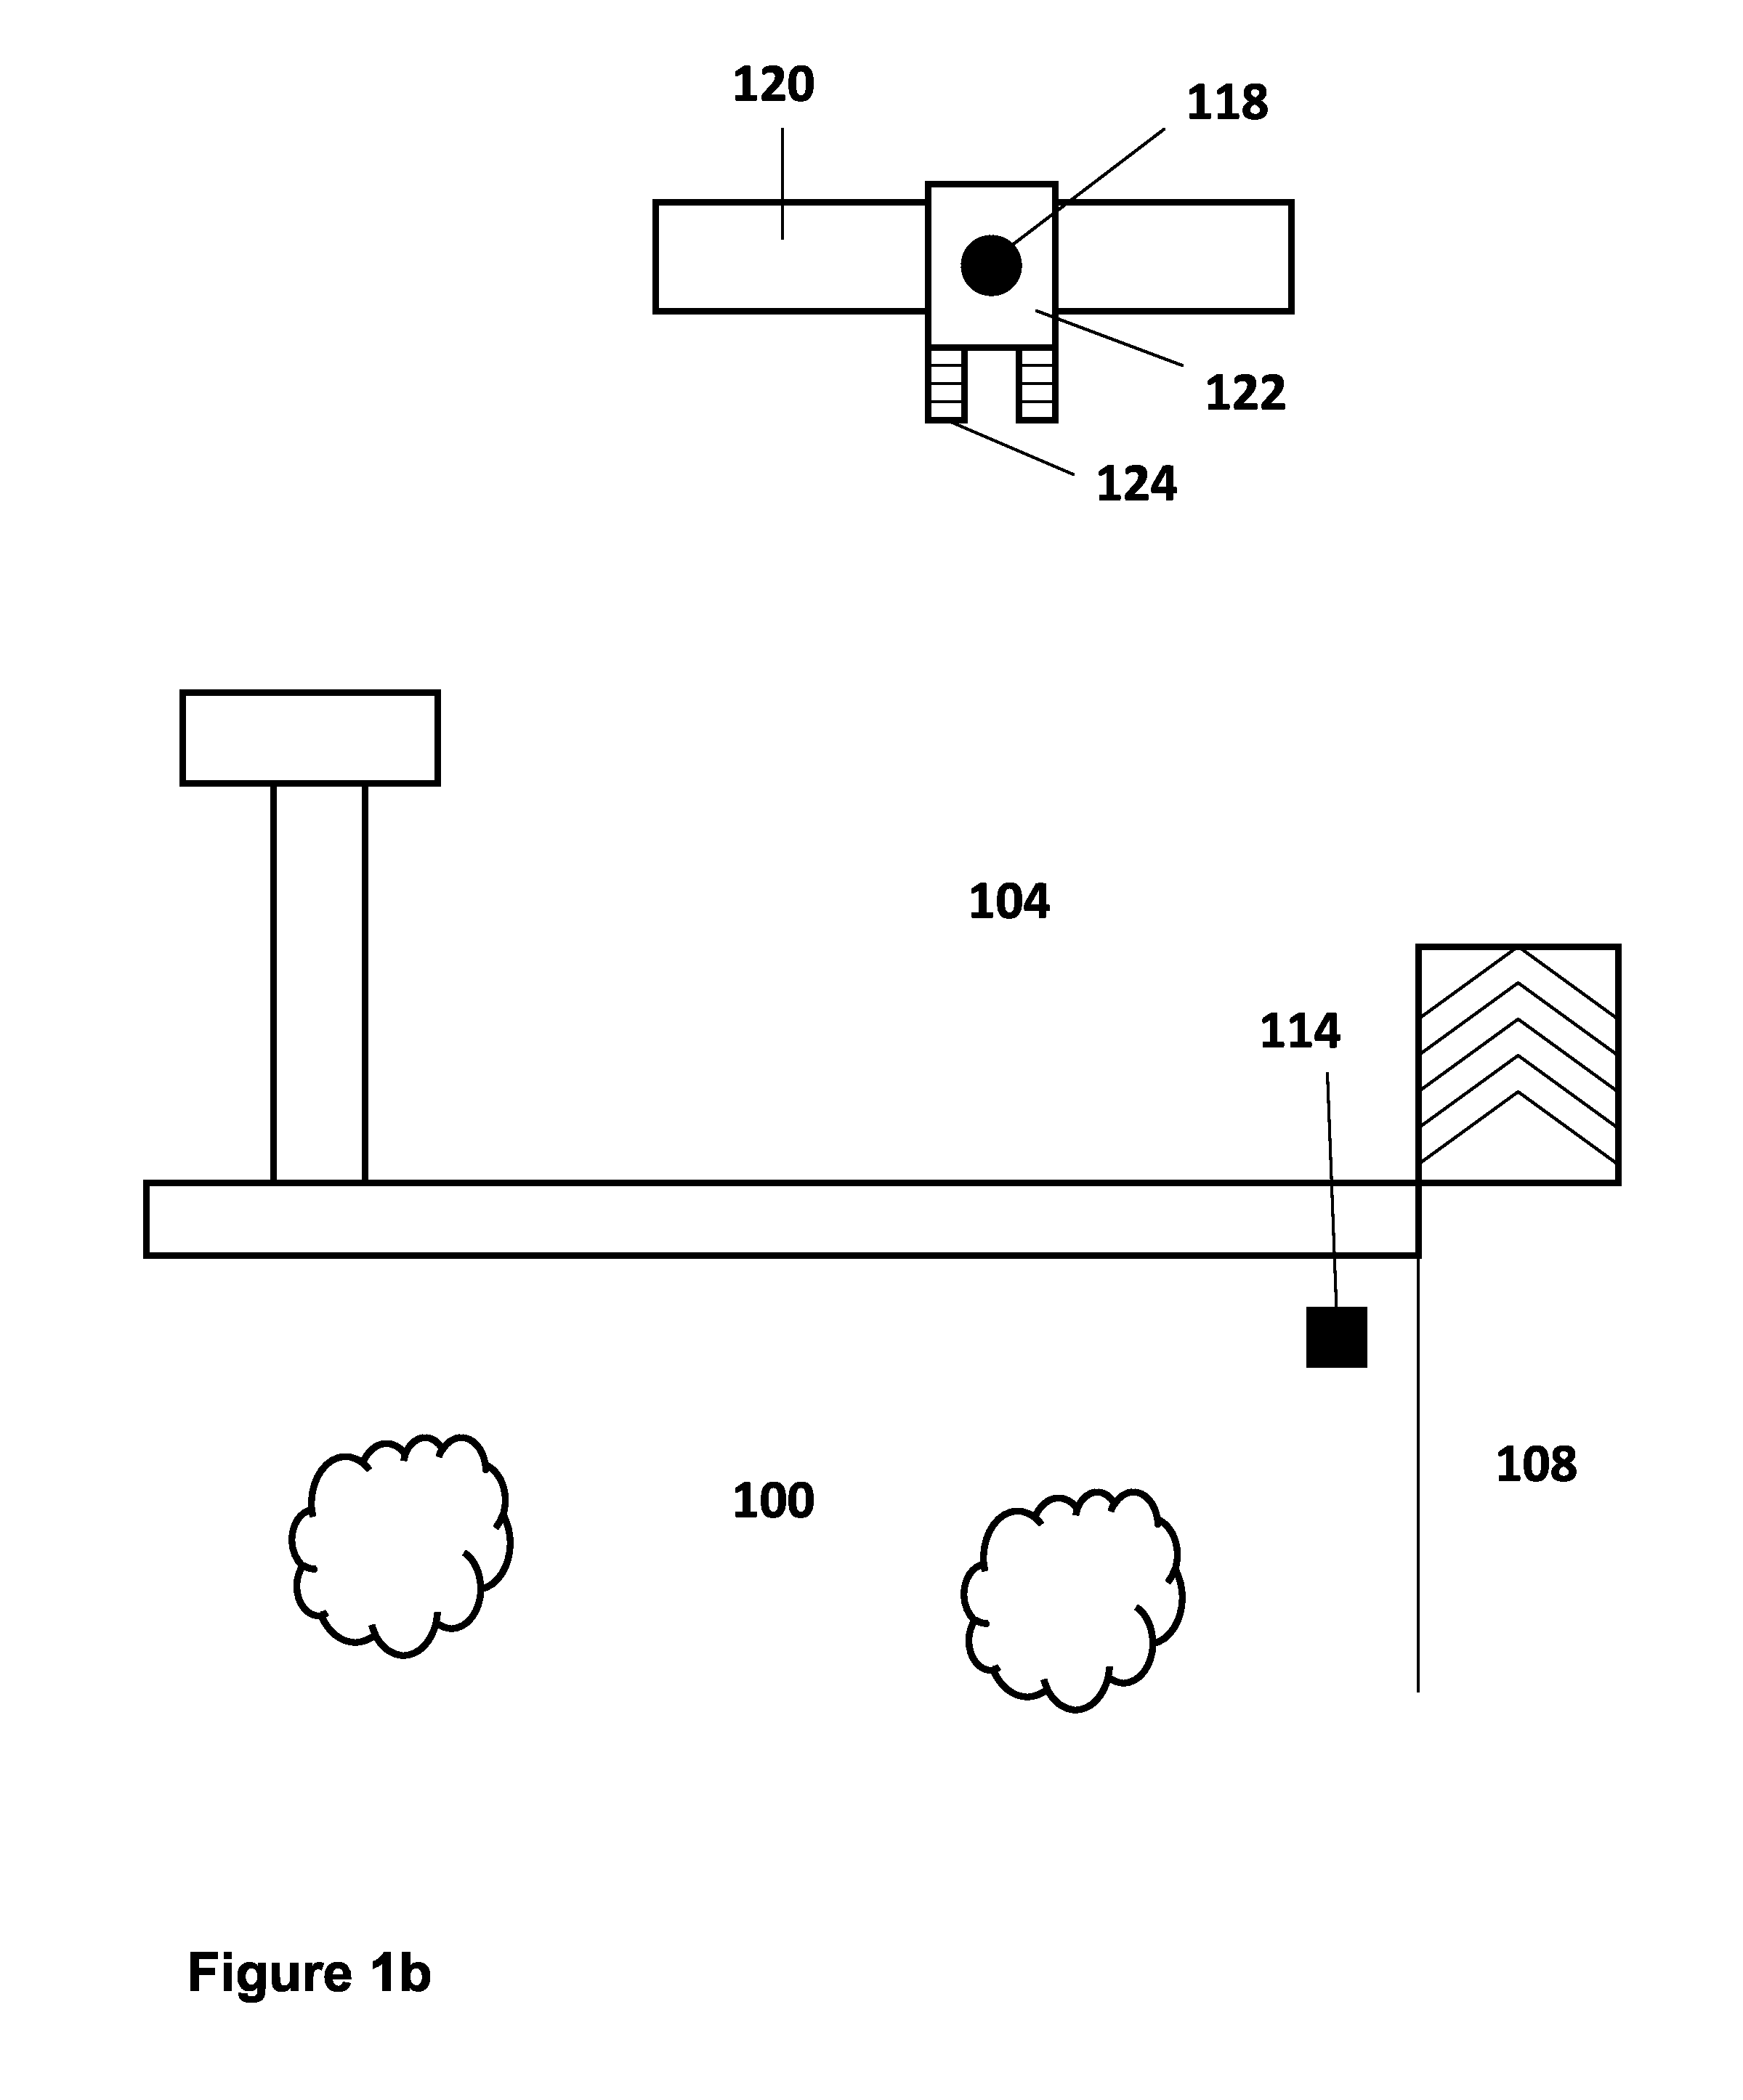 Method and Apparatus for Controlling Herbivore Fowl Populations